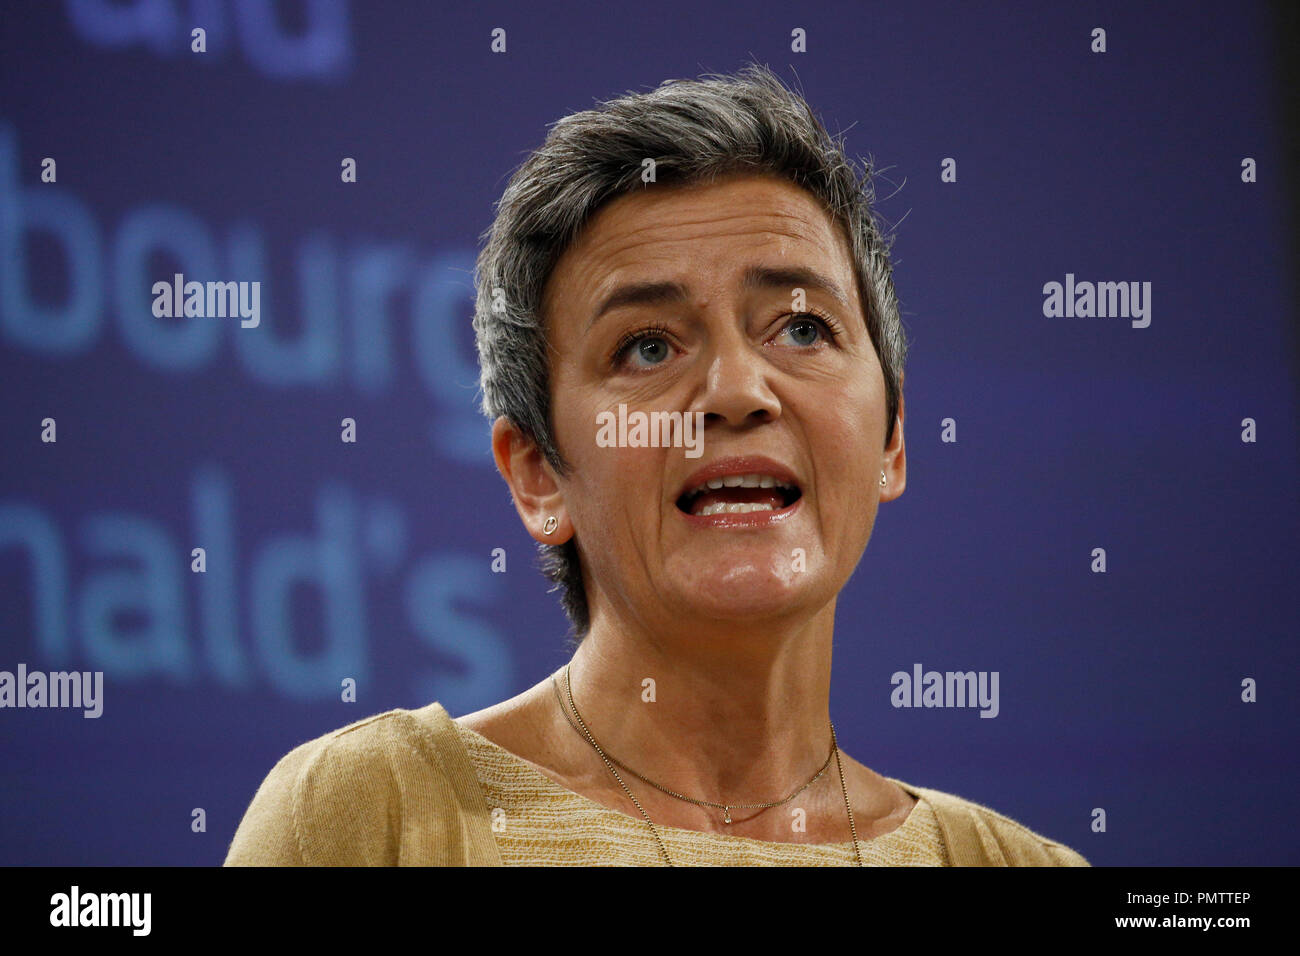 Brussels, Belgium. 19th Sep. 2018. European Competition Commissioner Margrethe Vestager holds a news conference on Luxembourg McDonald's State Aid case. Alexandros Michailidis/Alamy Live News Stock Photo